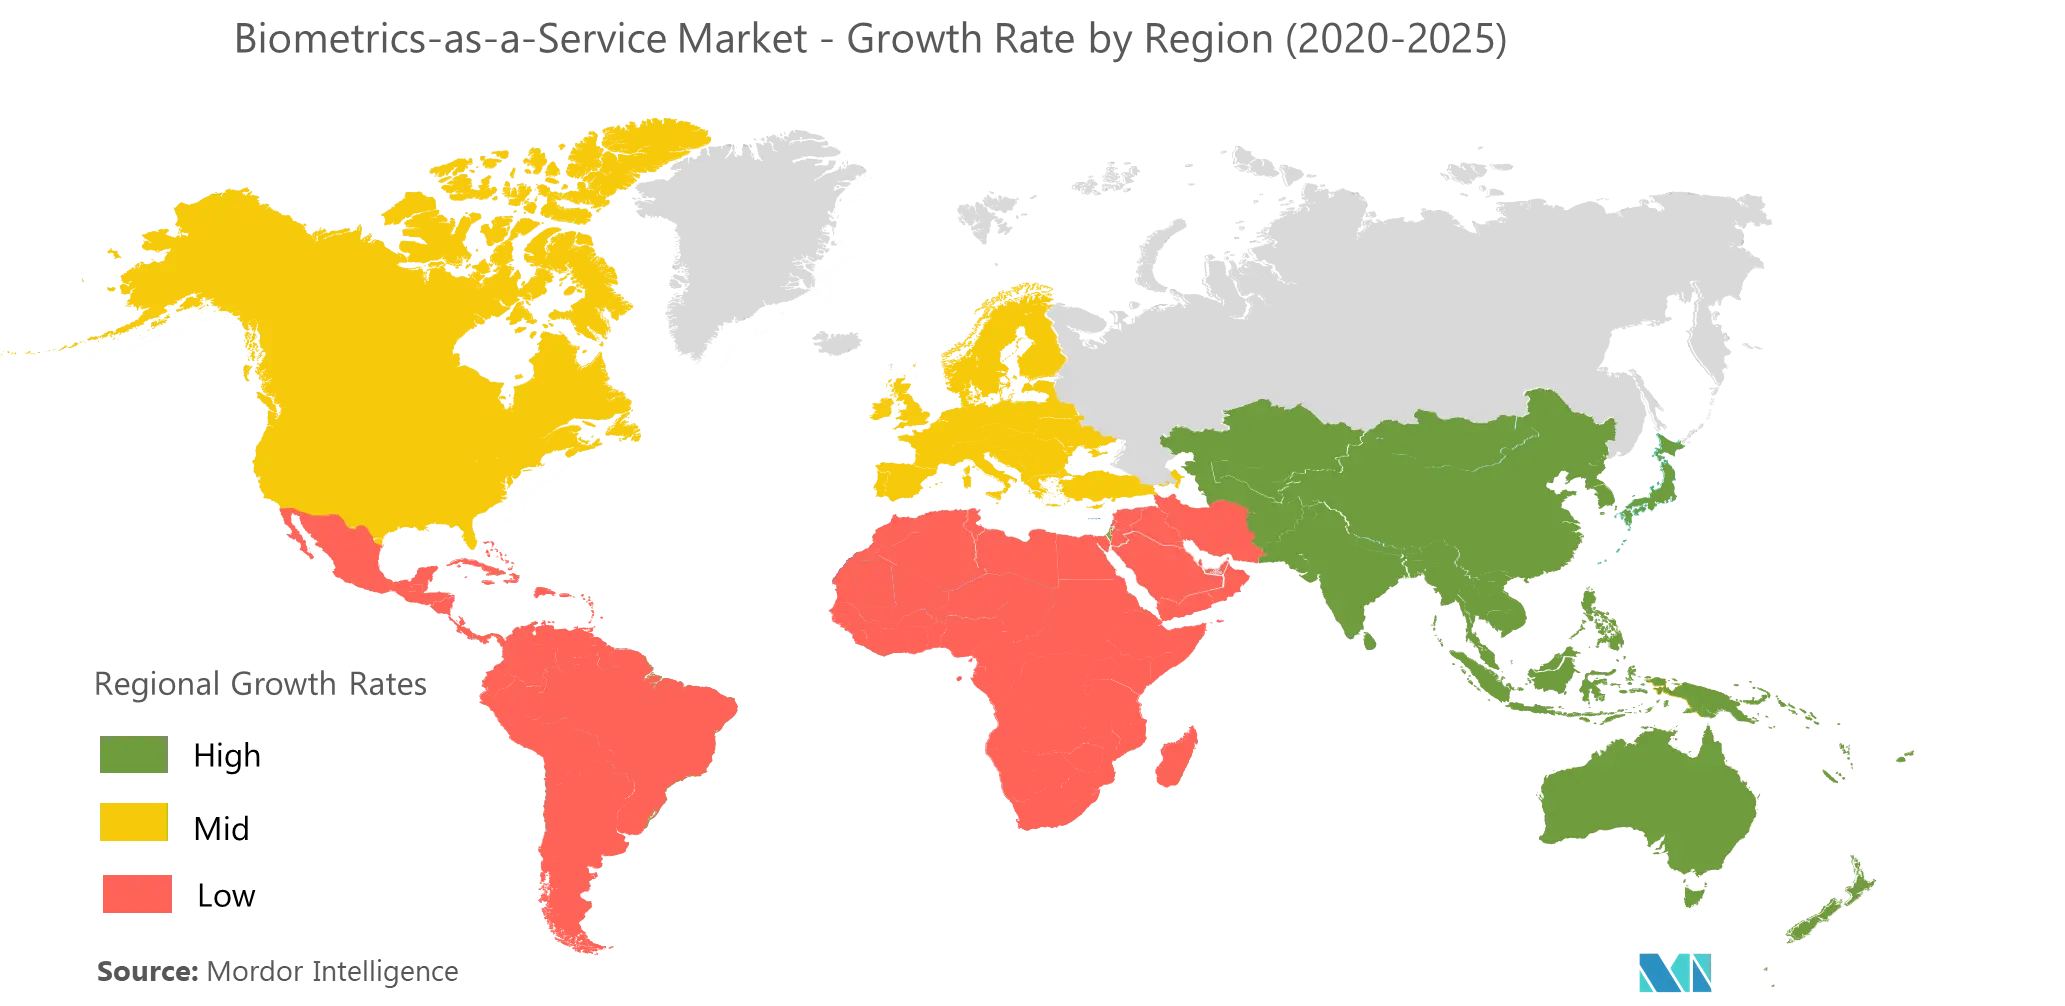 Biometrics-As-A-Service Market  Growth Rate by Region (2020-2025)